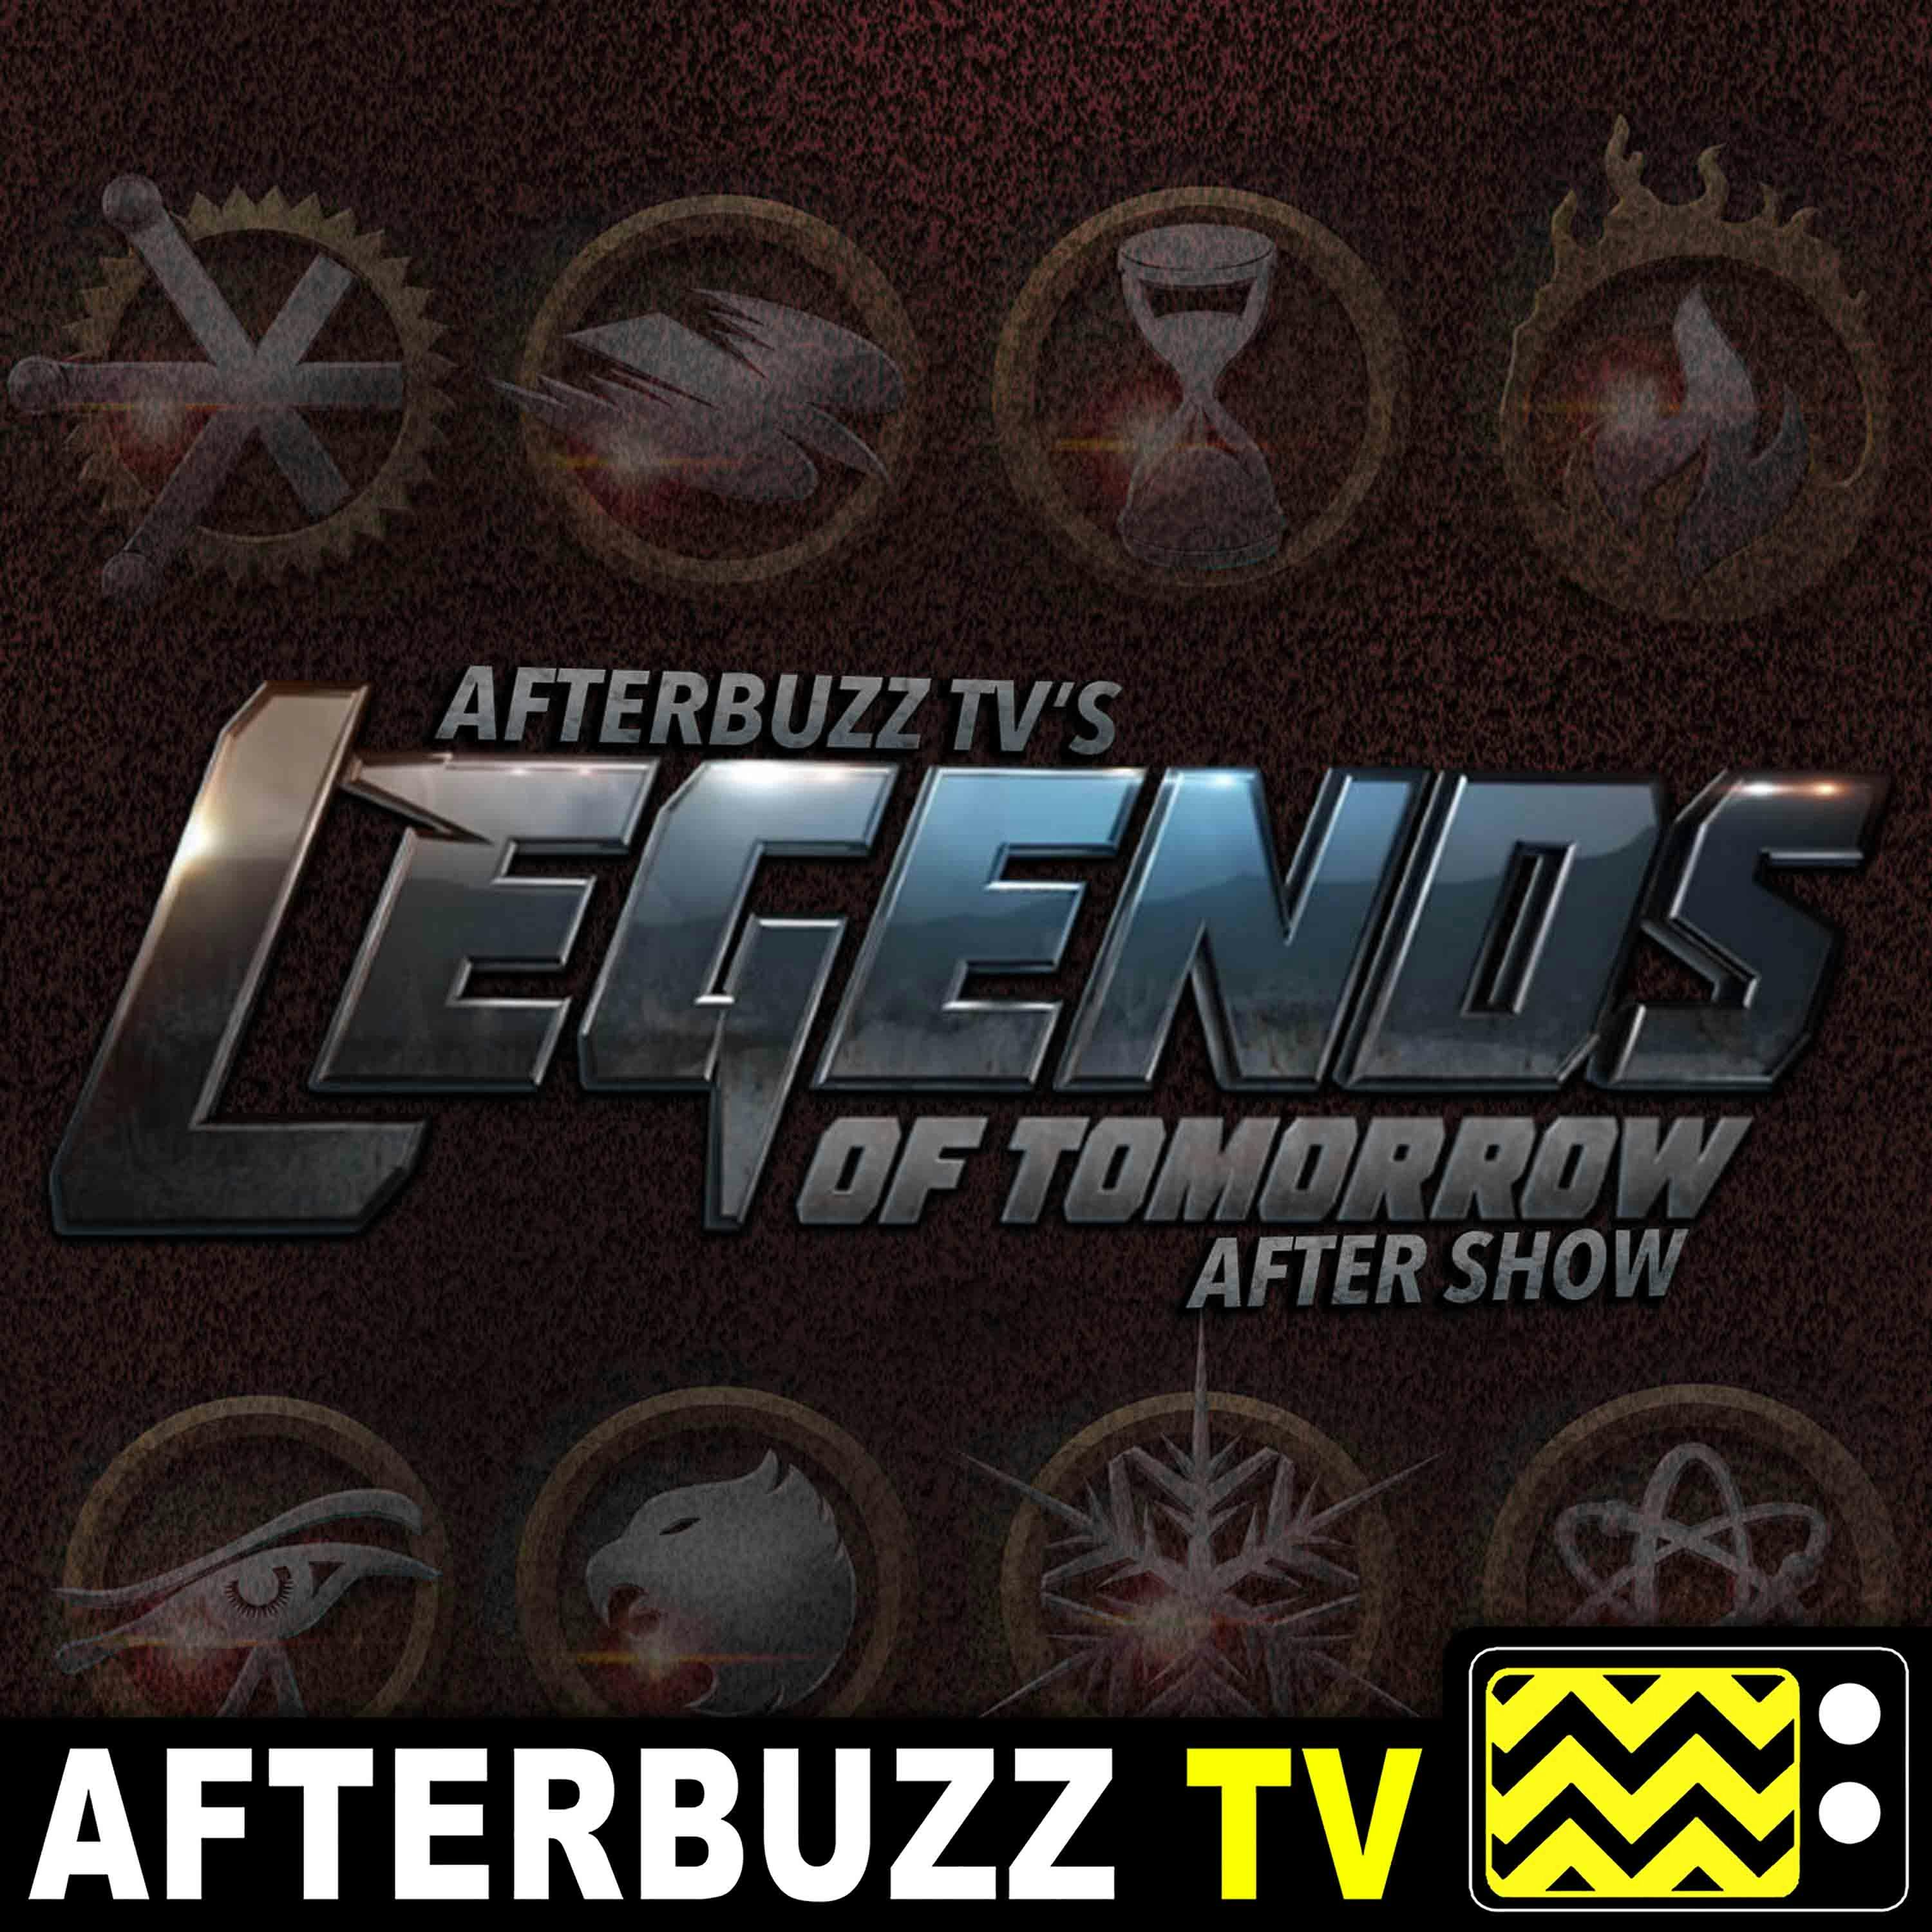 Legends Of Tomorrow S:3 | Amazing Grace E:14 | AfterBuzz TV AfterShow